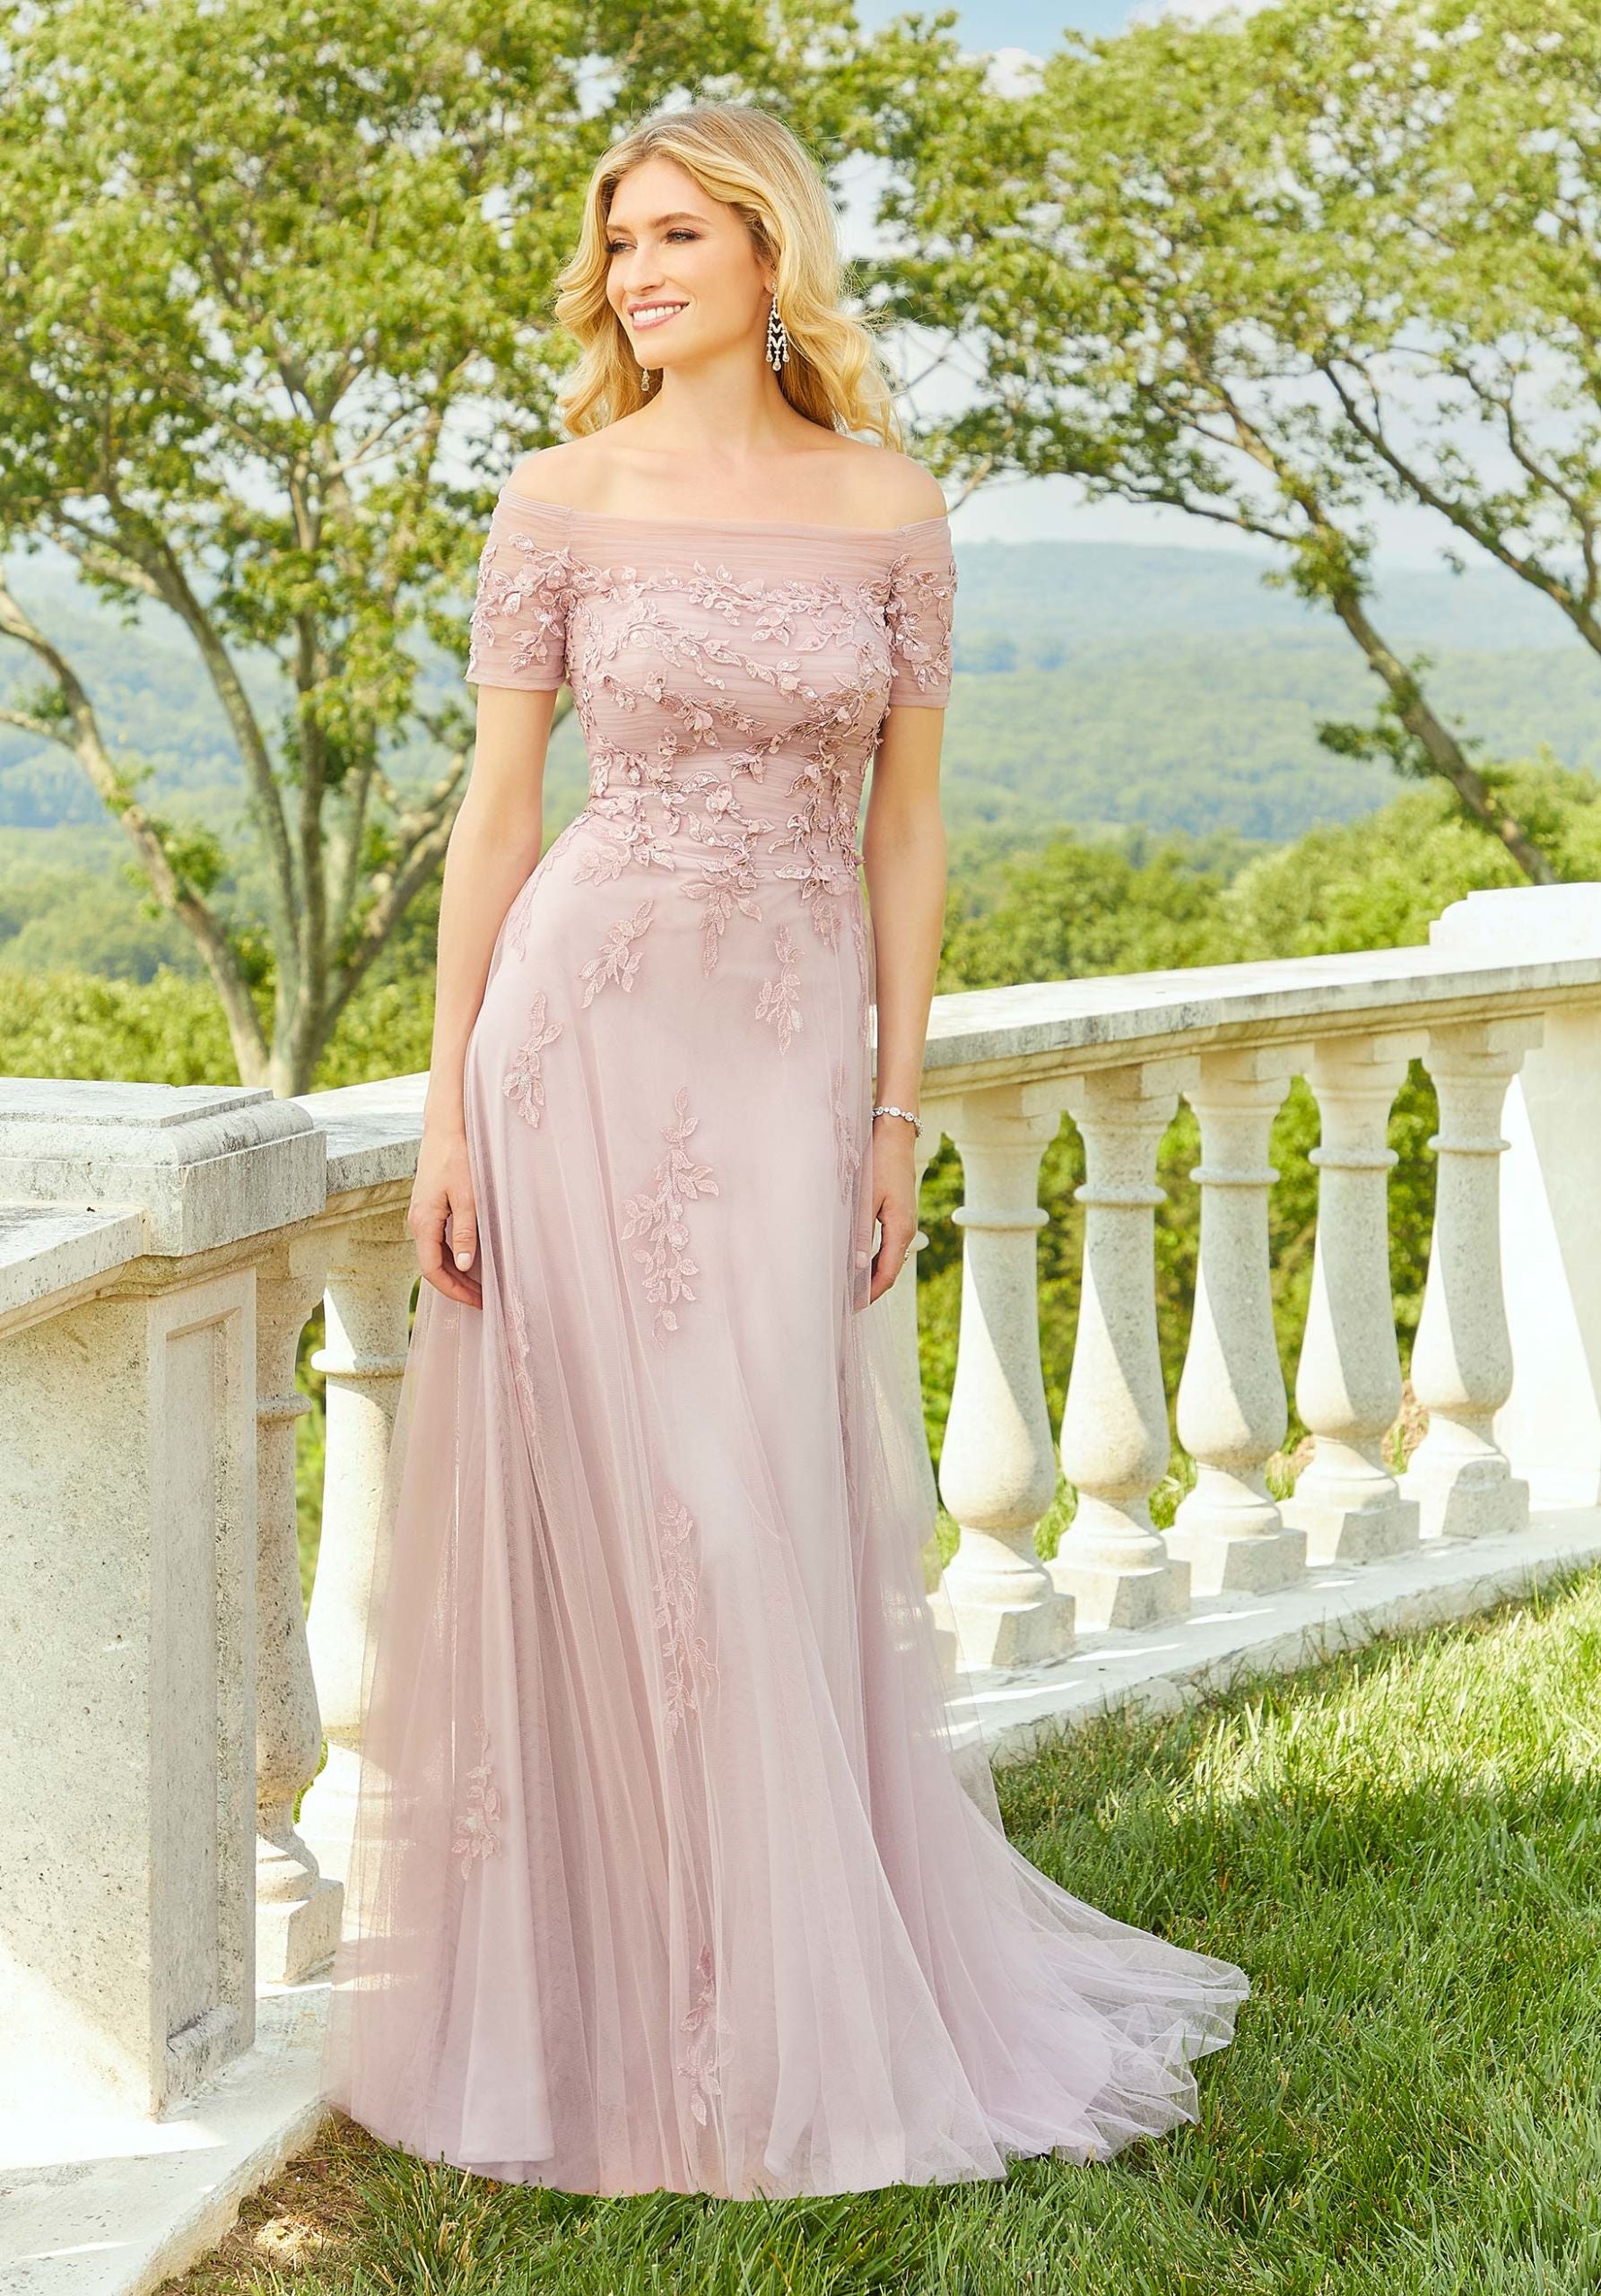 Soft Net Evening Gown With Beaded Lace Morilee